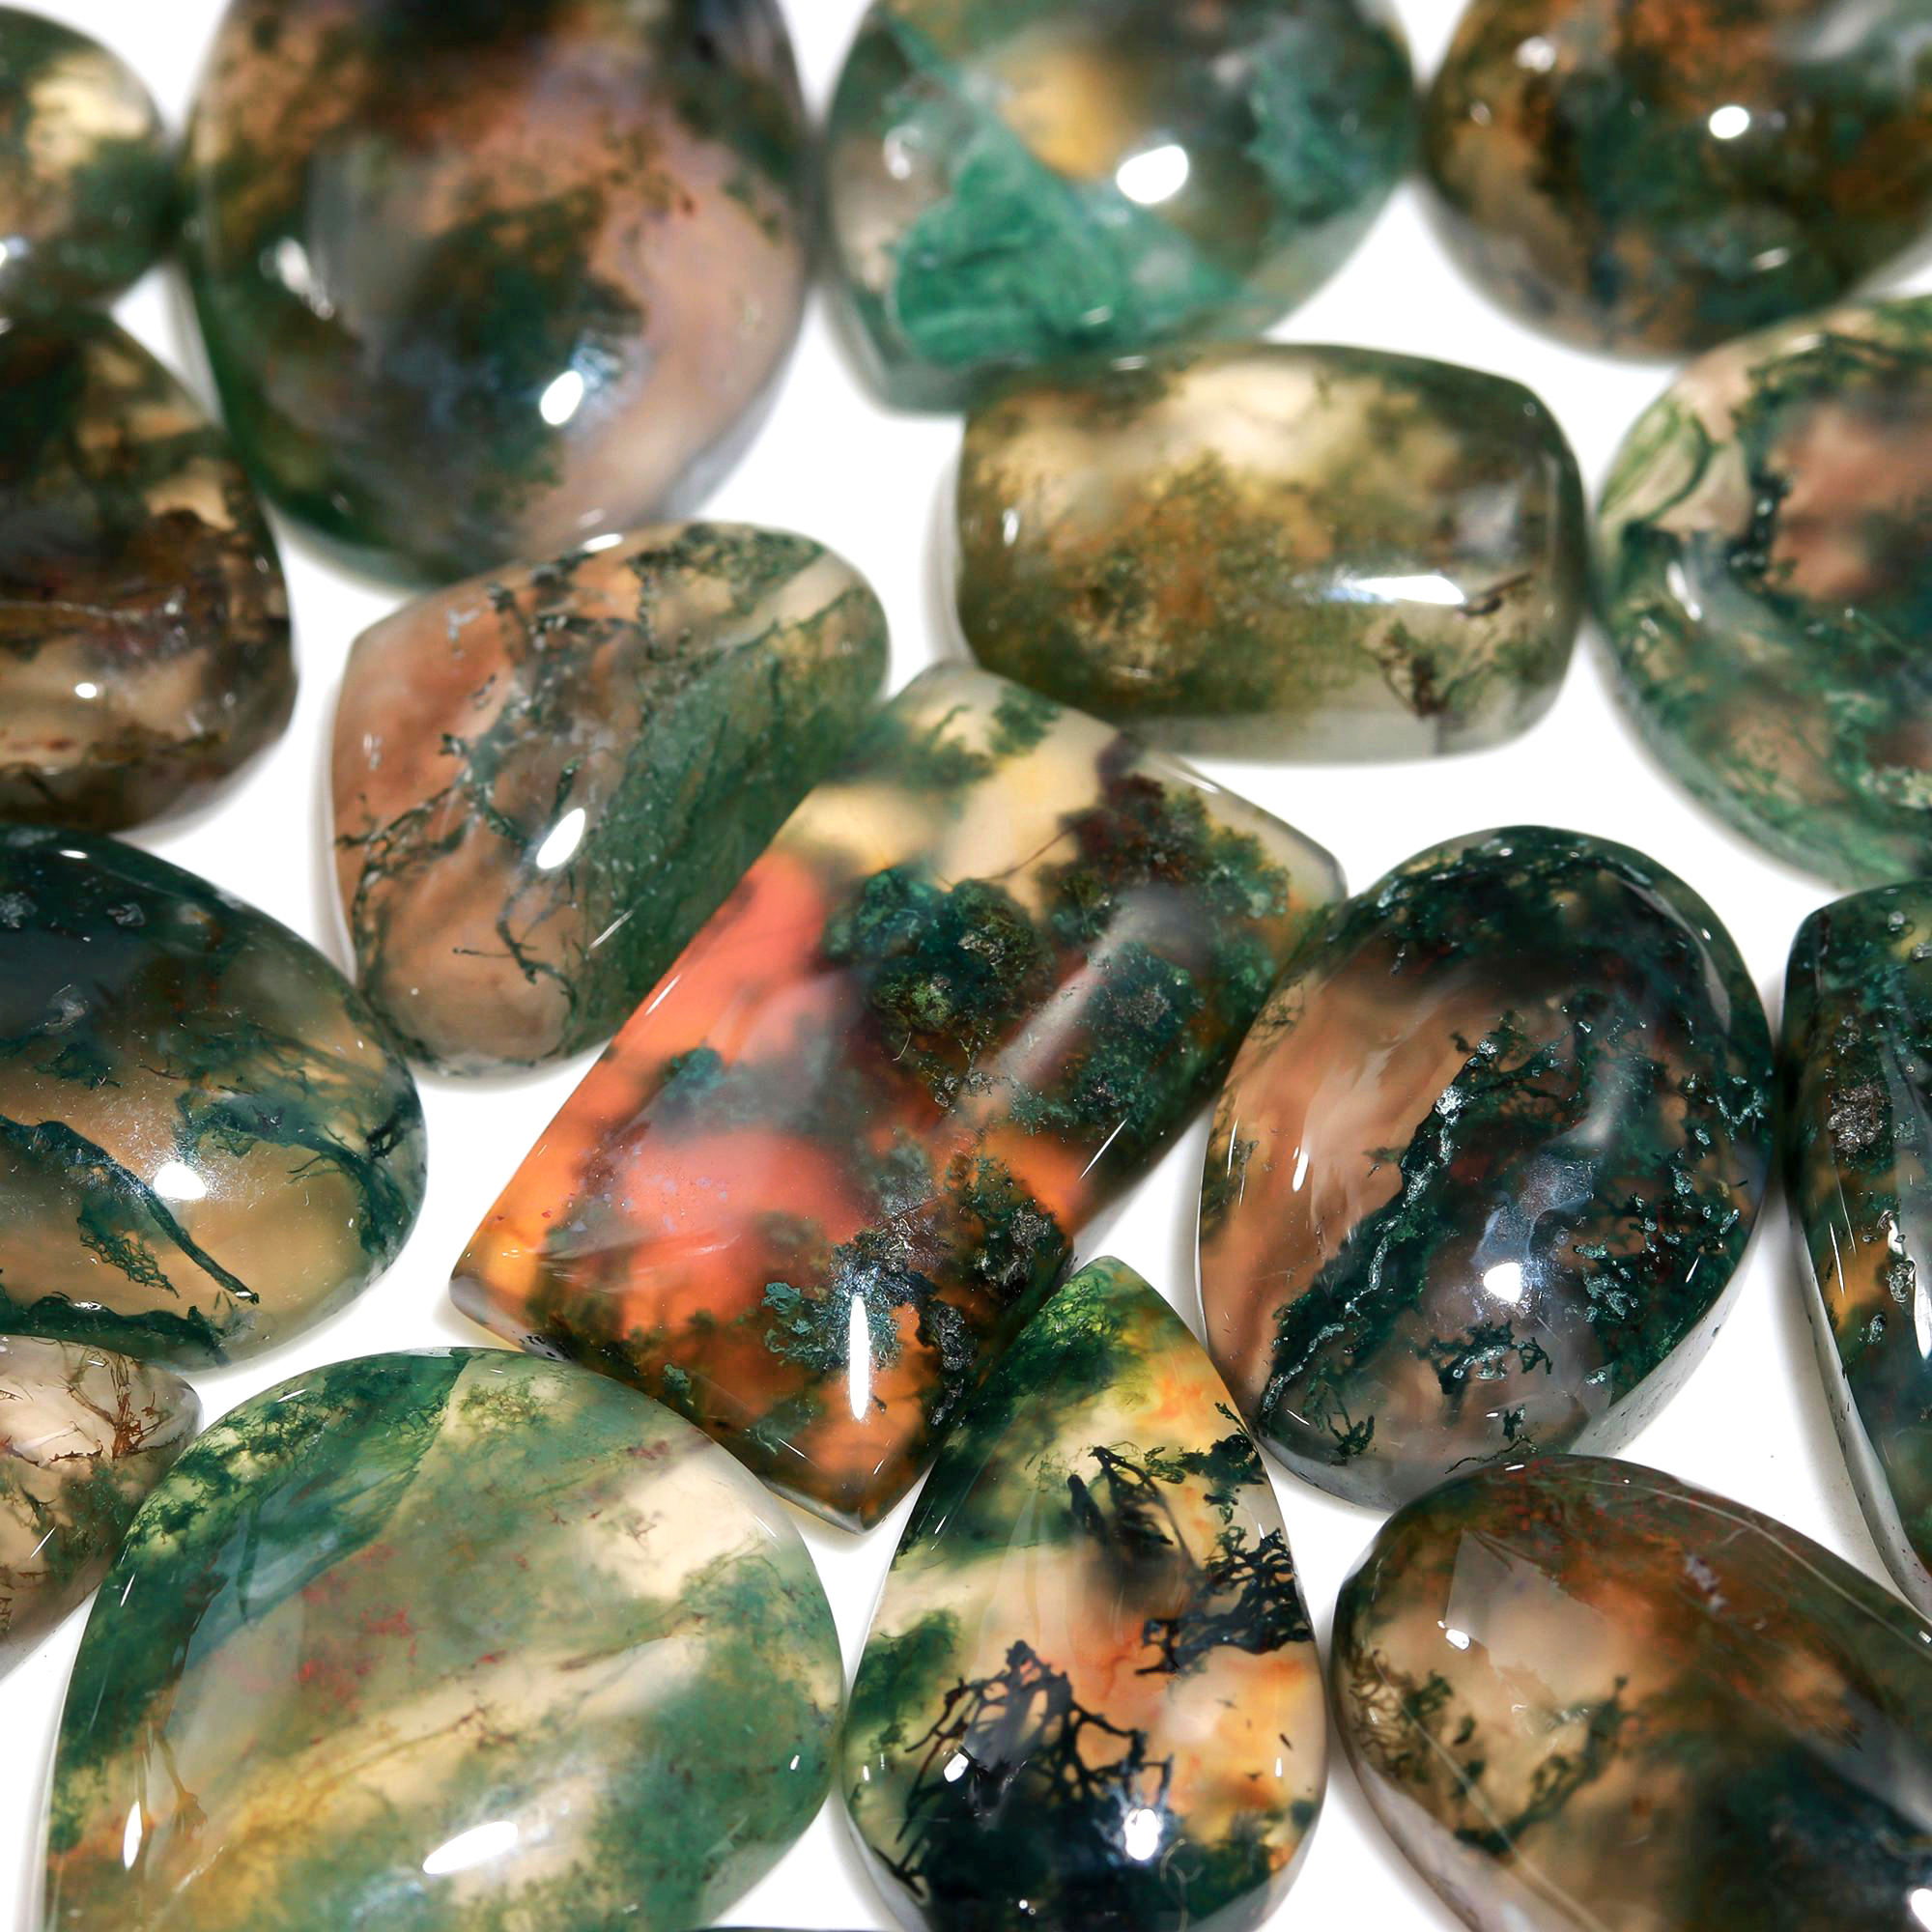 18 Pc 169 Cts Natural Green Moss Agate Mix Loose gemstone cabochon Wholesale lot polished both side Size 20x12 8x8mm